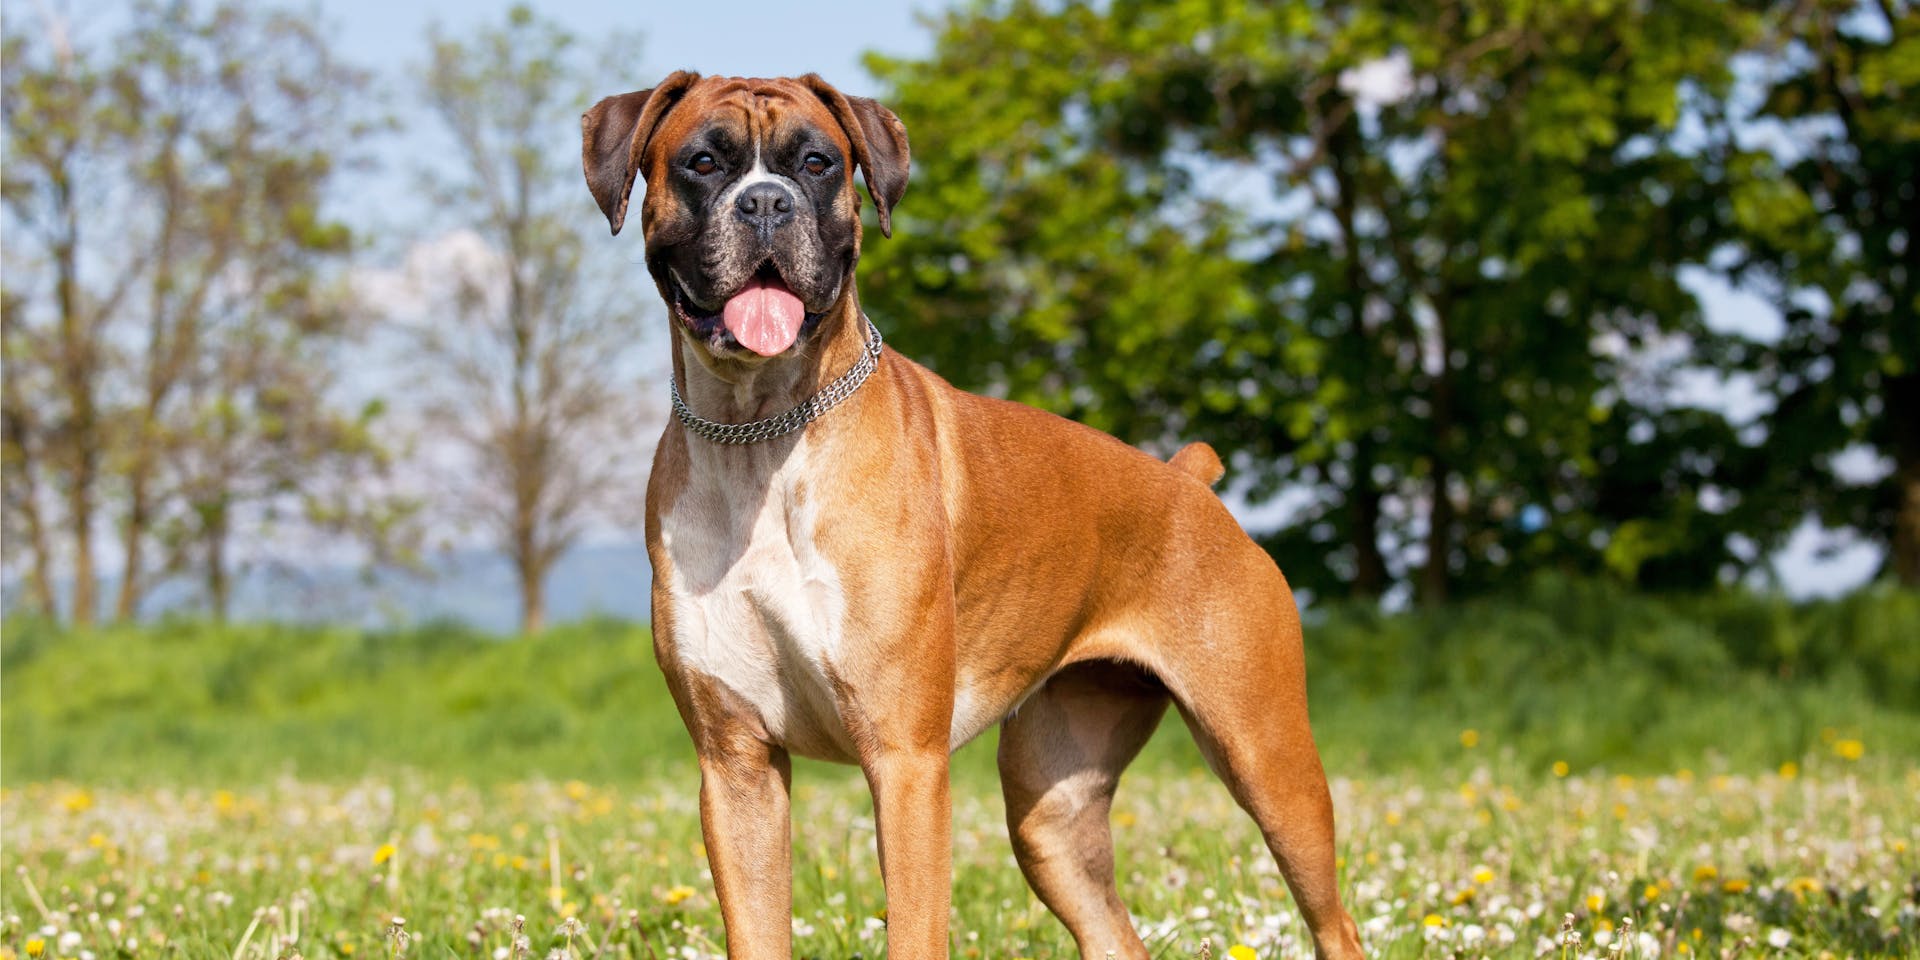 A Boxer dog standing in a field